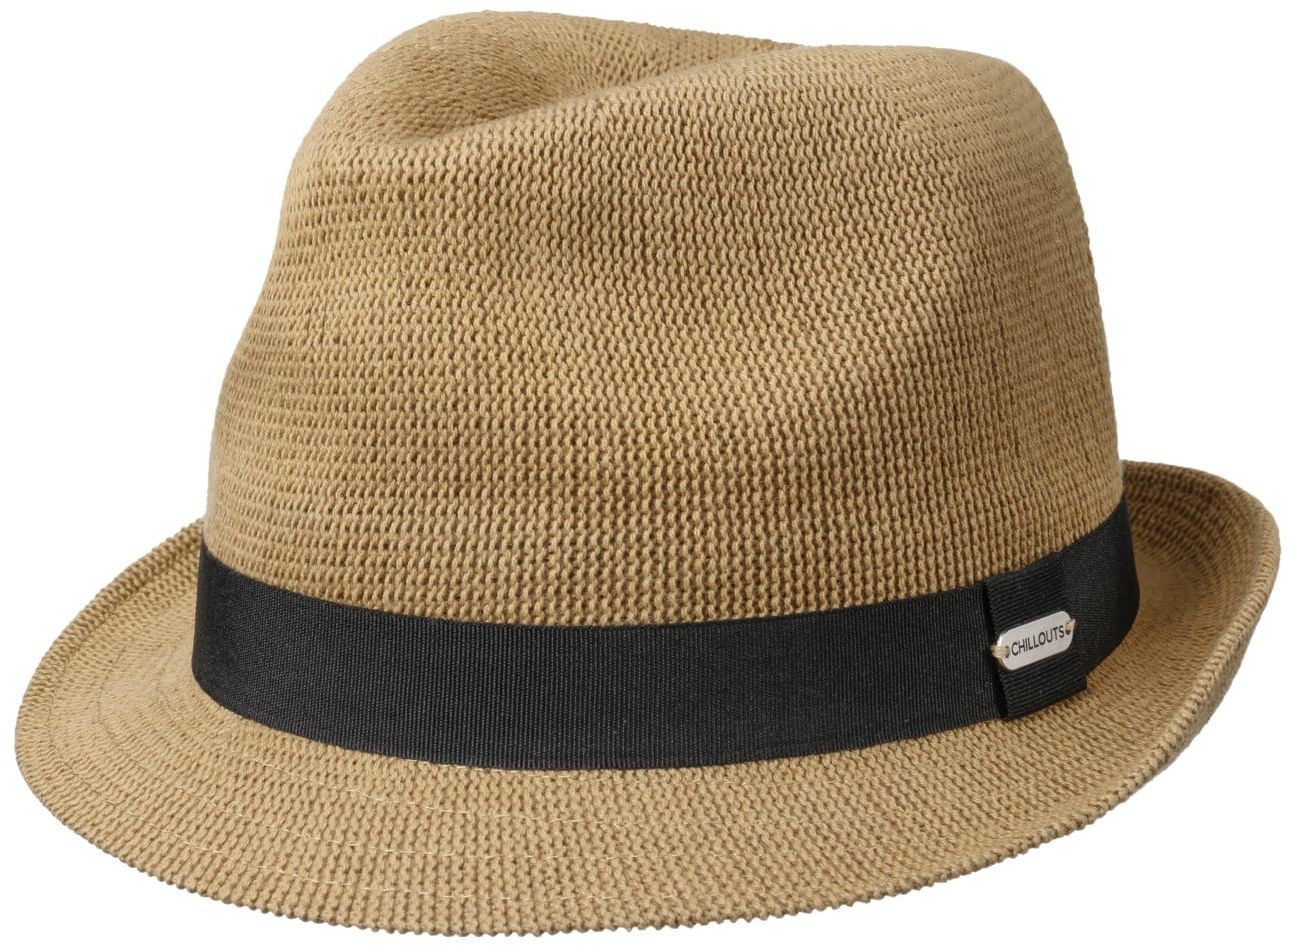 Chillouts Bardolino Cotton Trilby Hat by beżowy, L (58-59 cm)